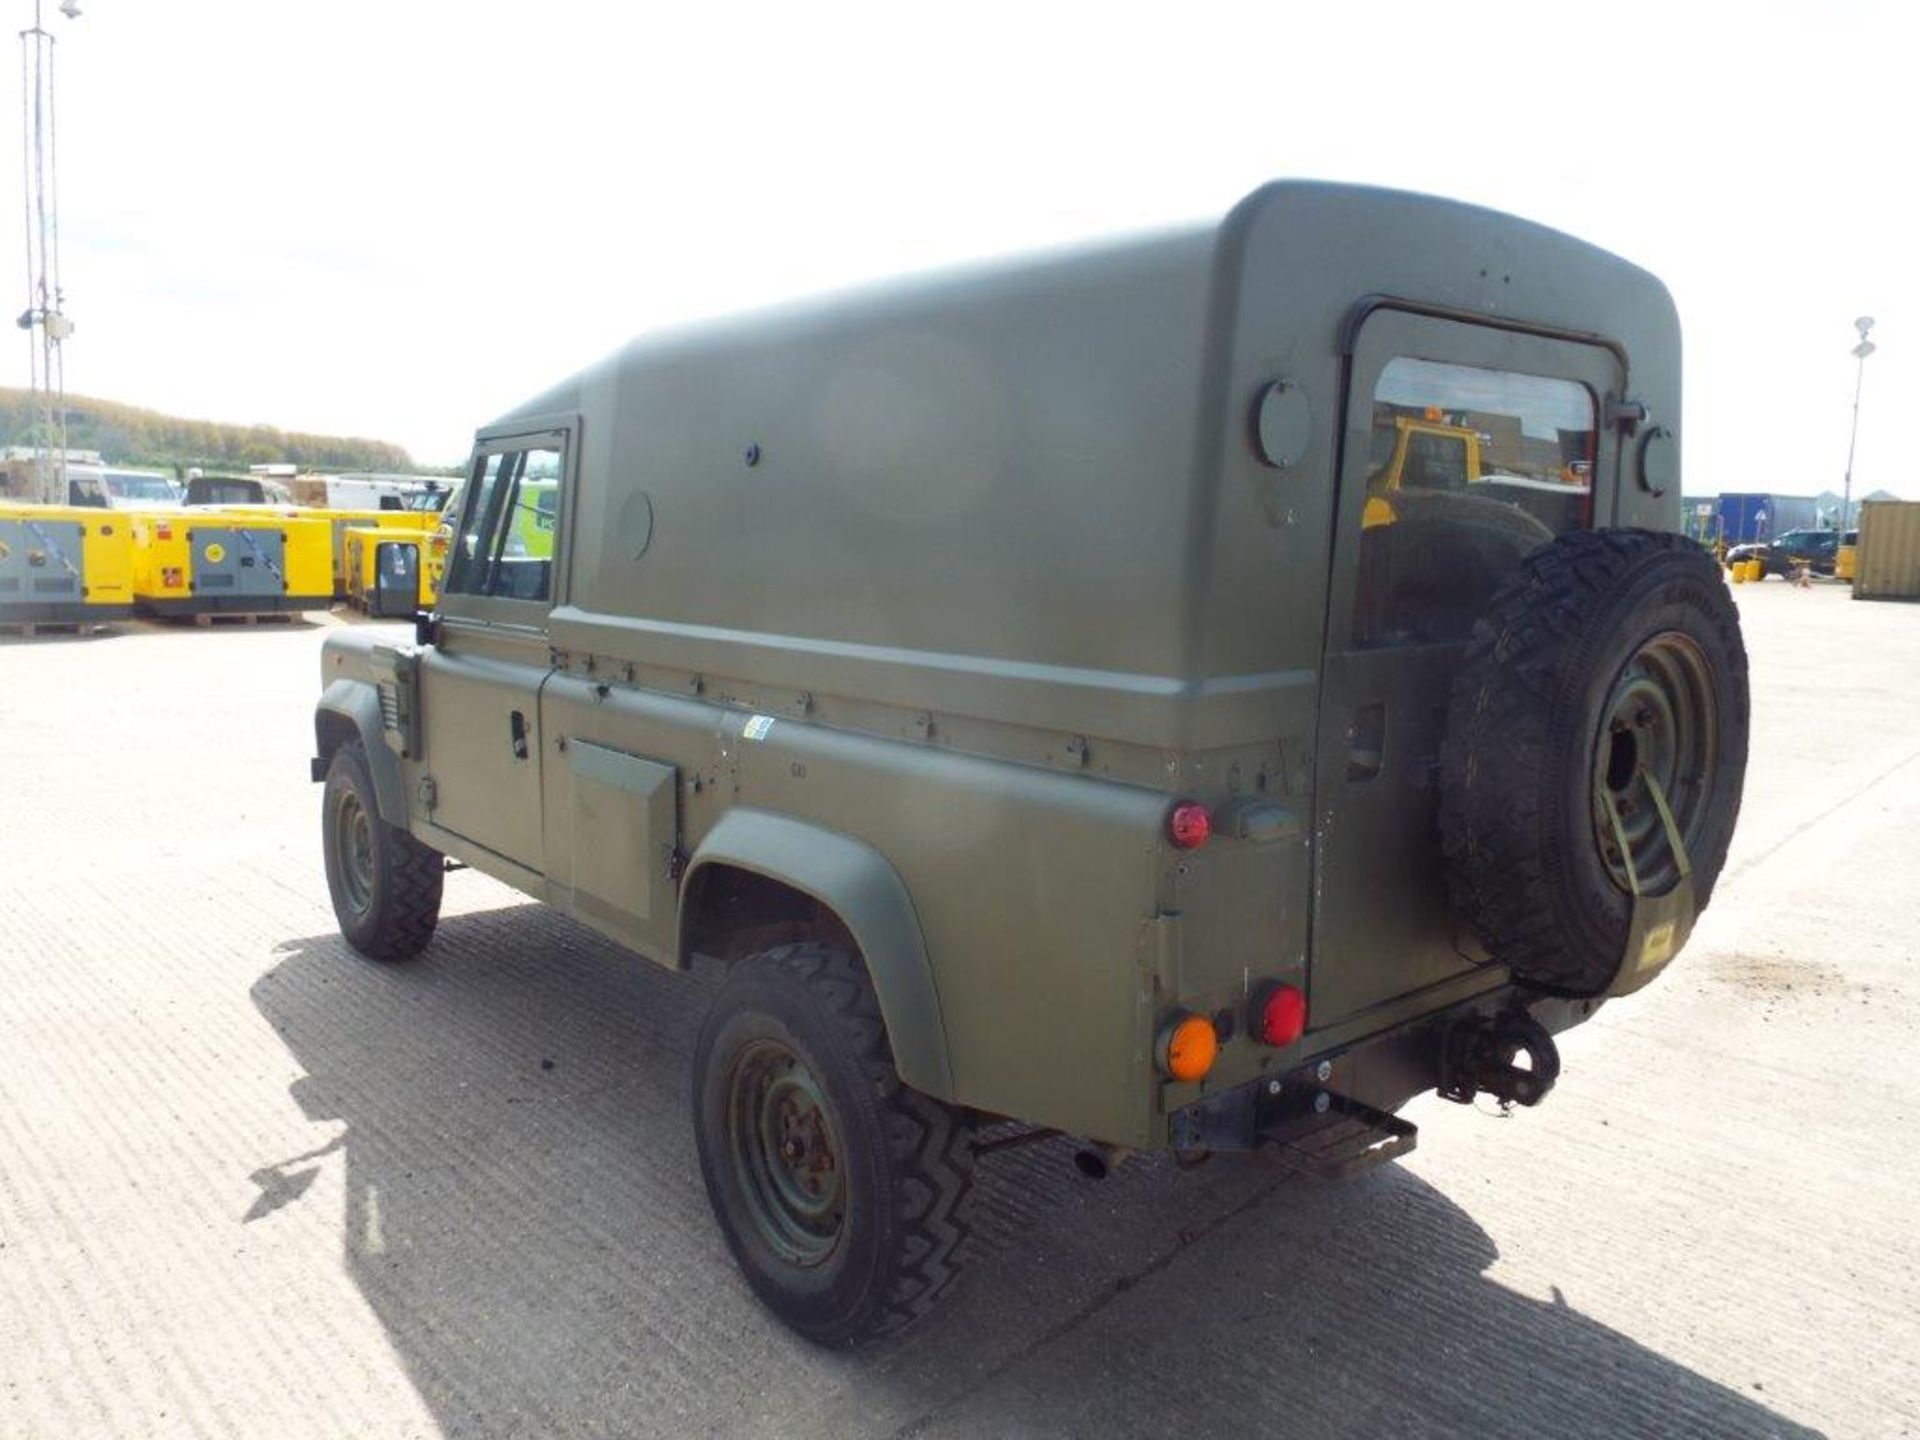 Military Specification Land Rover Wolf 110 Hard Top - Image 5 of 26